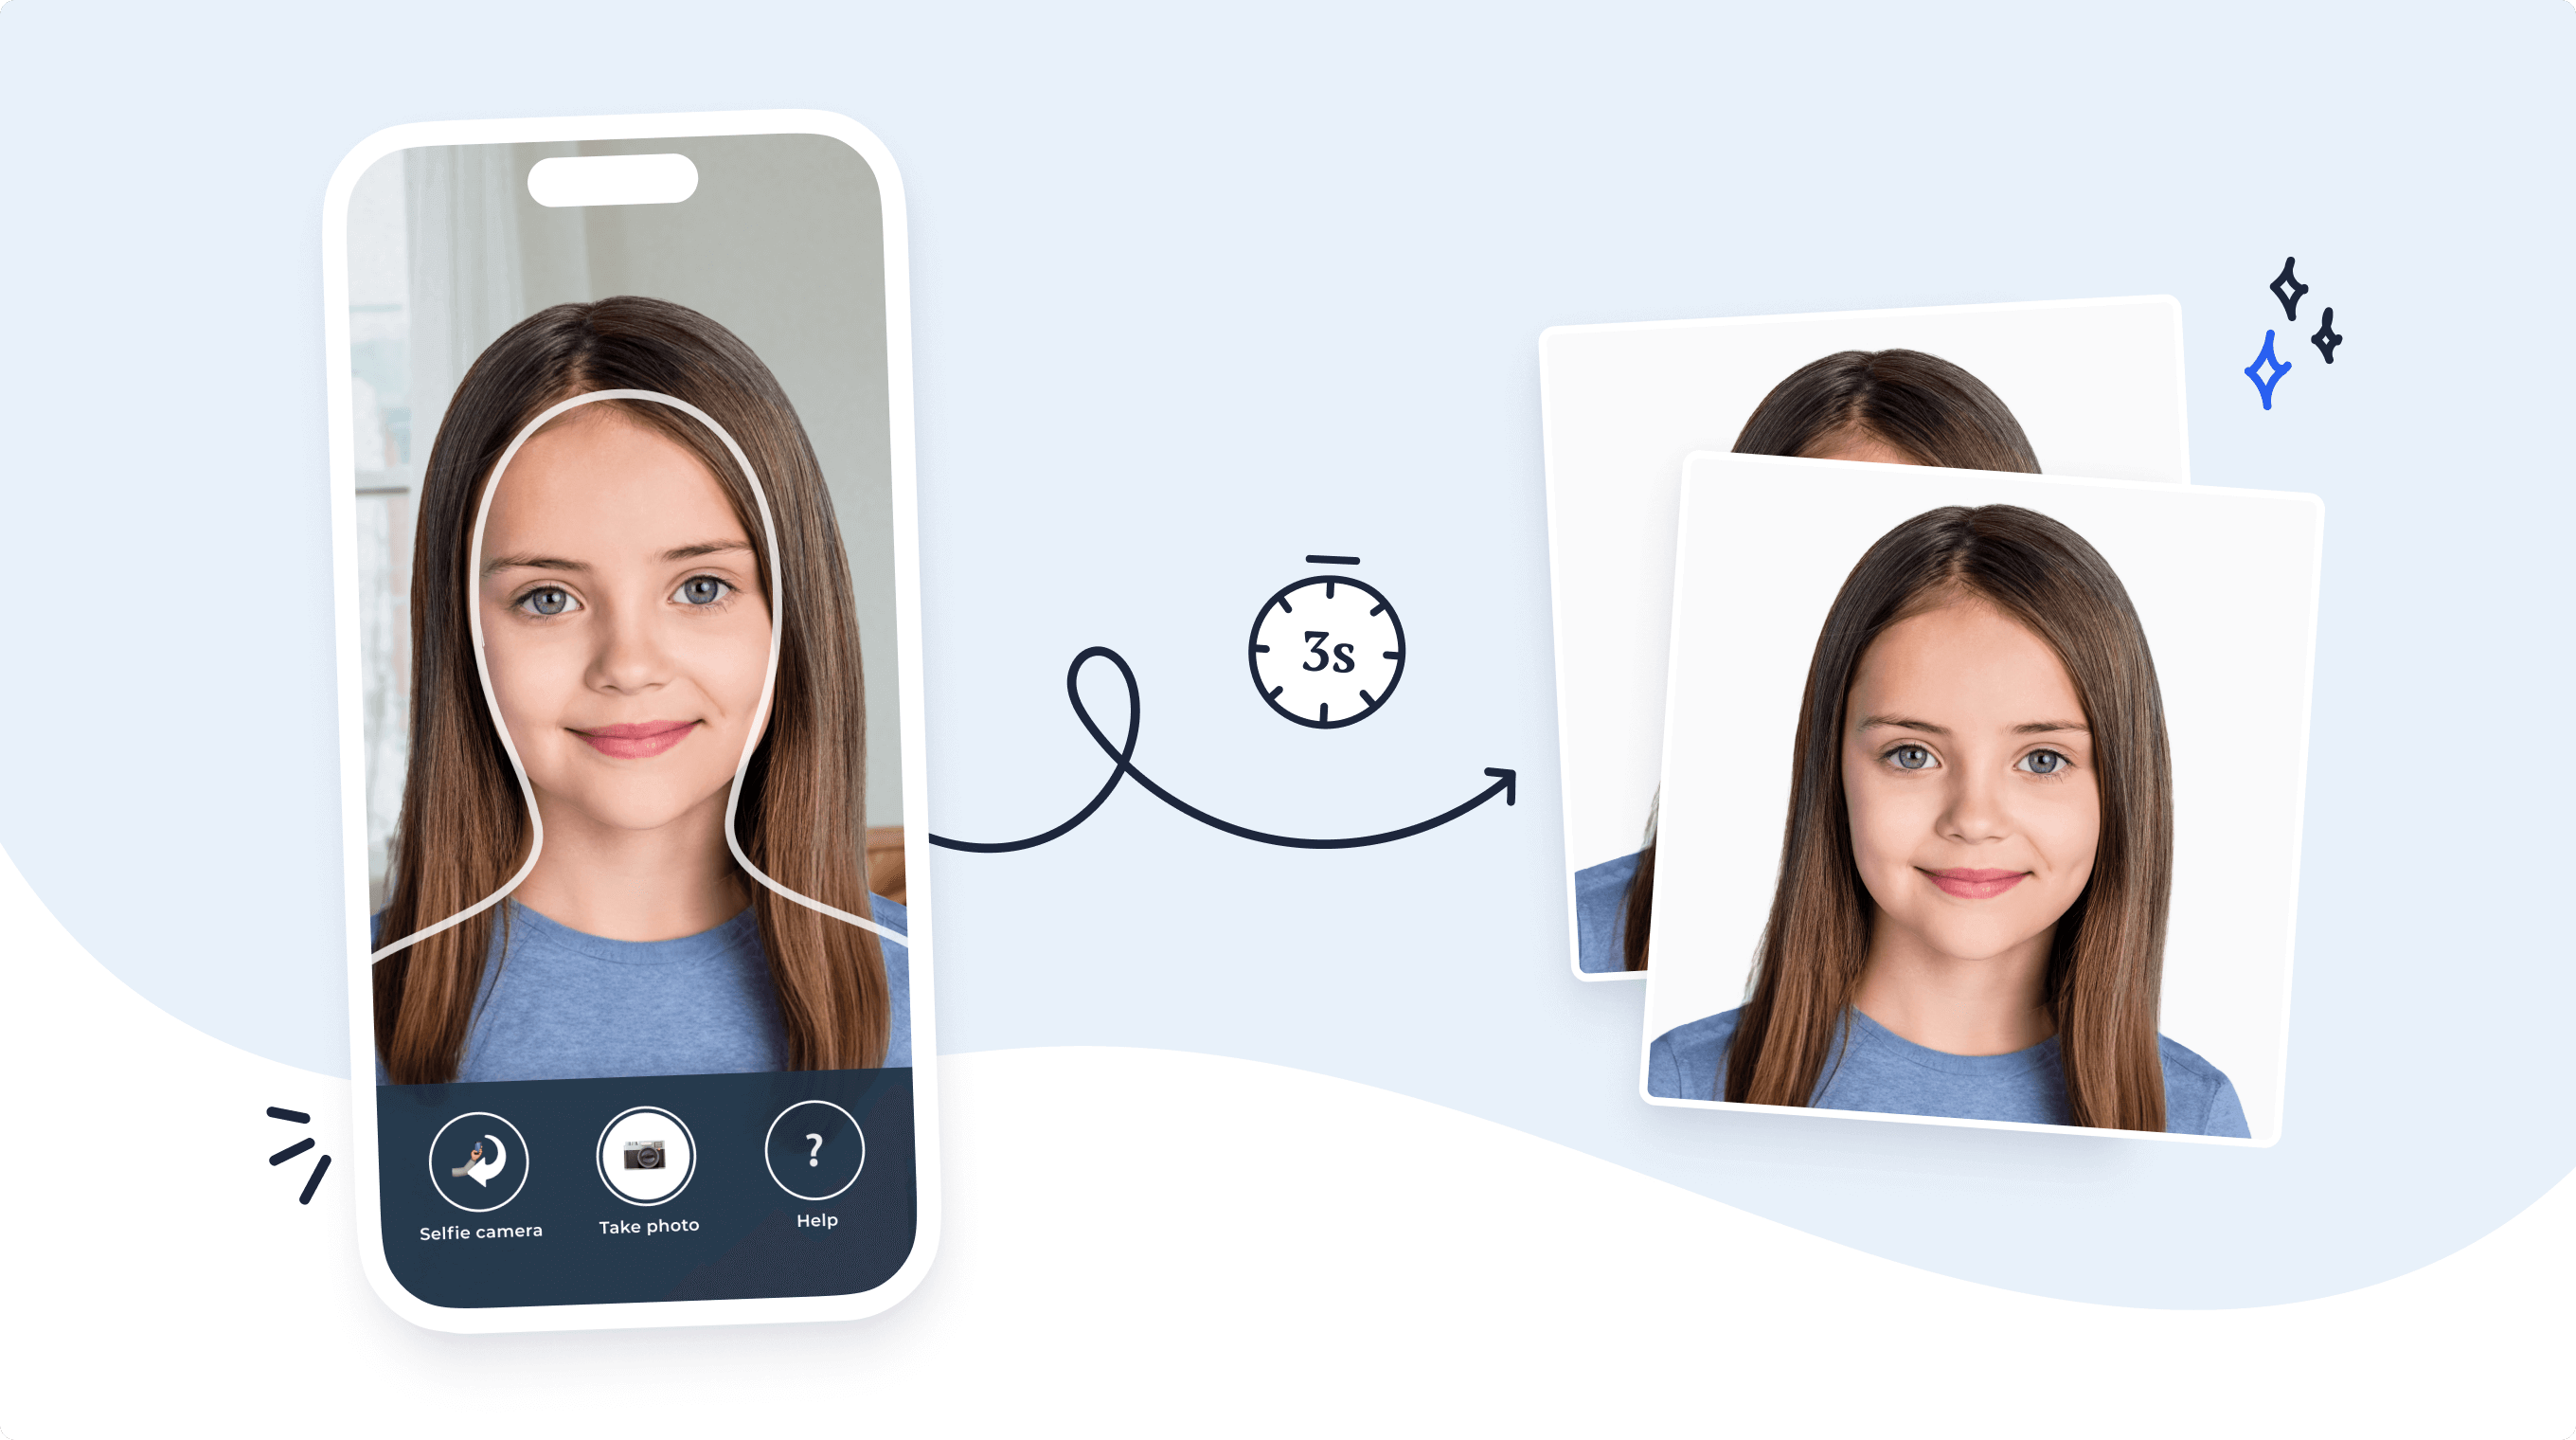 A mobile phone running a passport photo app. The passport photo is ready in 3 seconds with the background removed, and prints are ready to order.